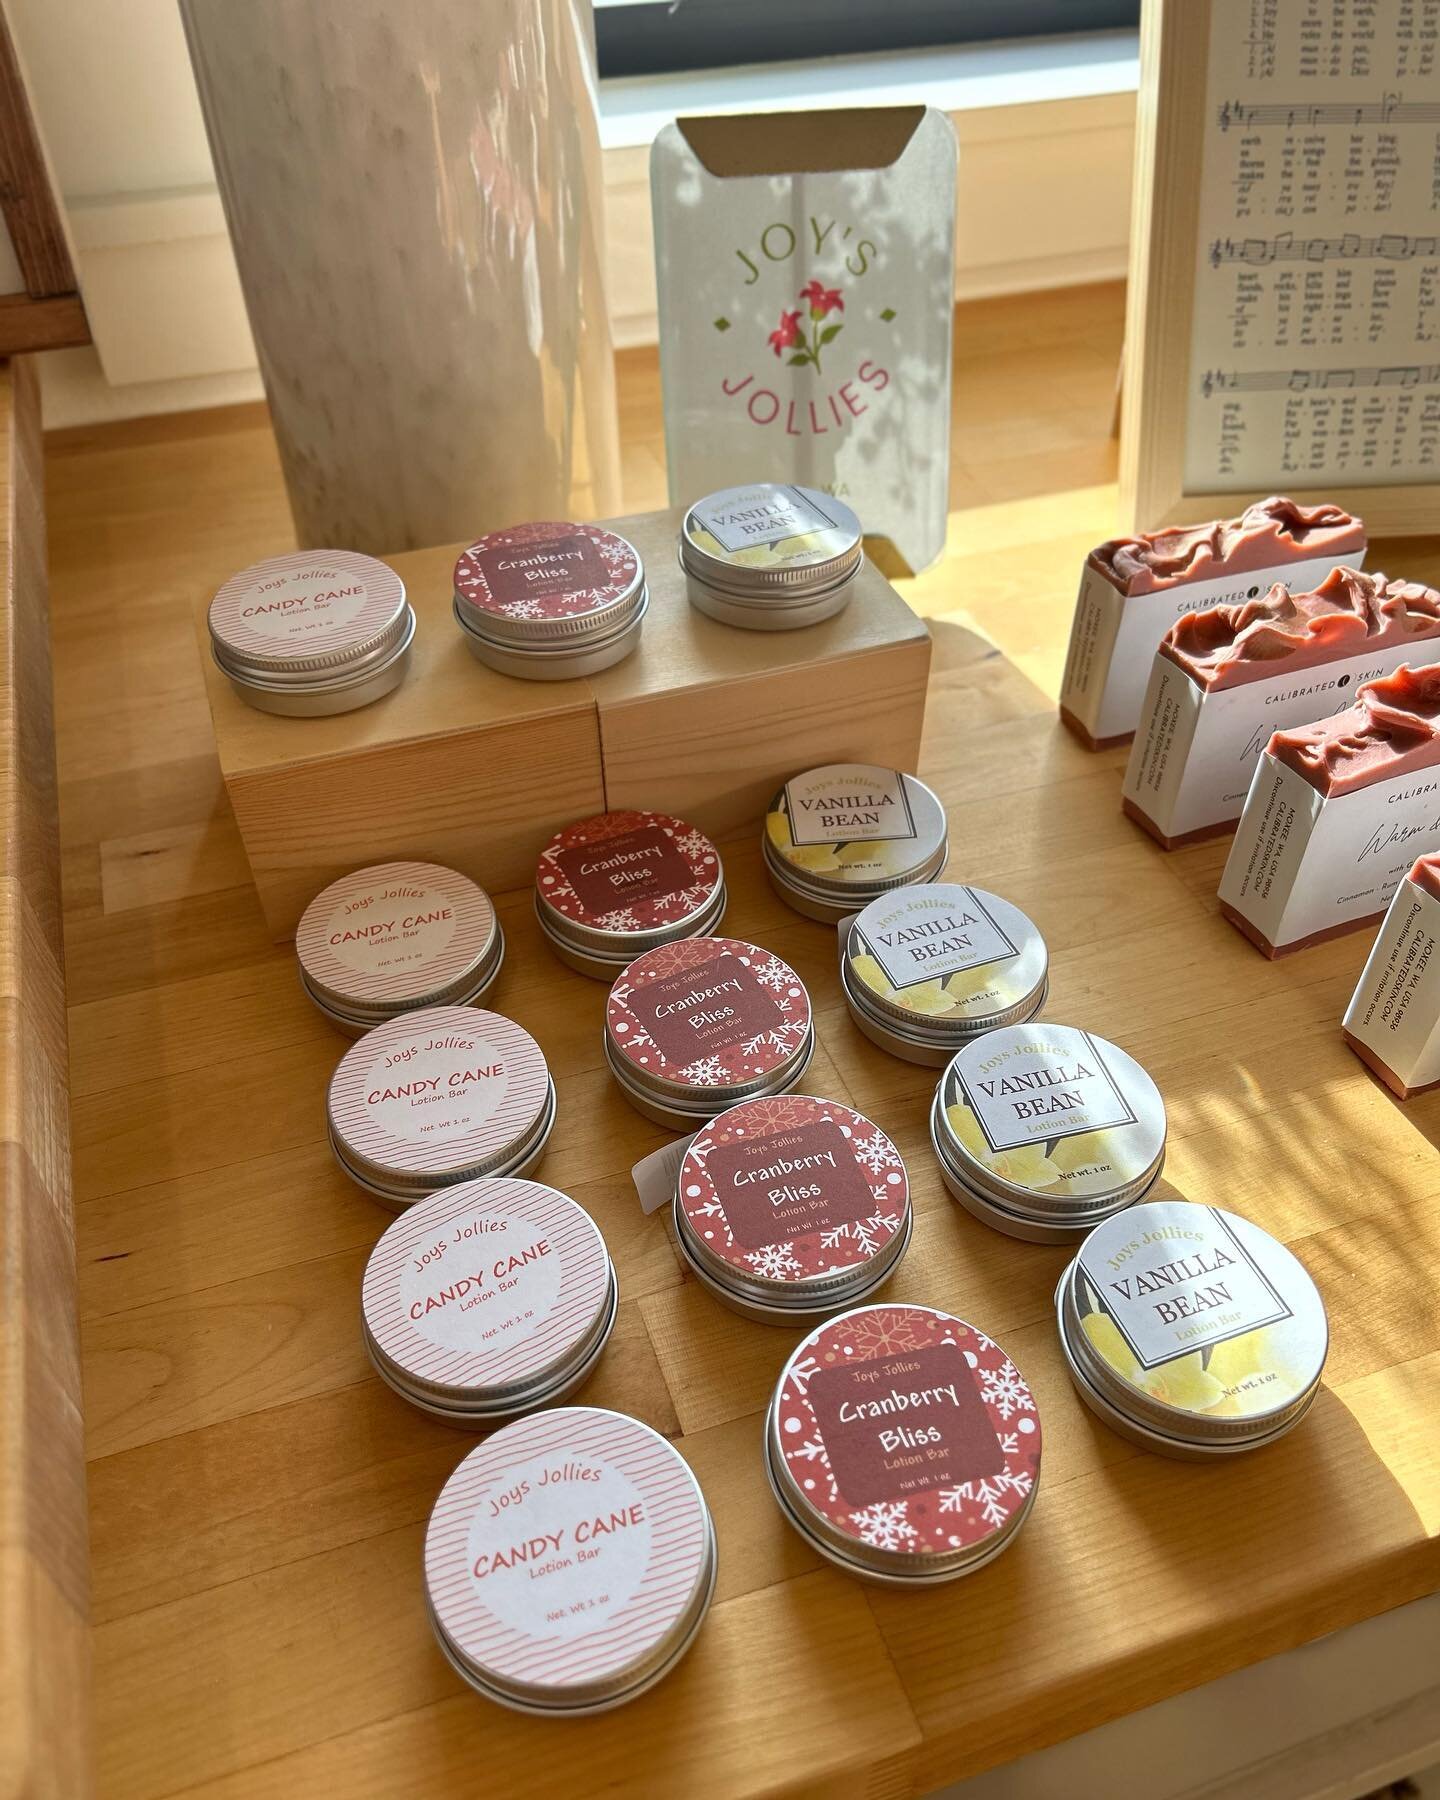 Welcoming to the shop @joys_jollies and her wonderfully unique lotion bars! Perfect for stocking stuffers!